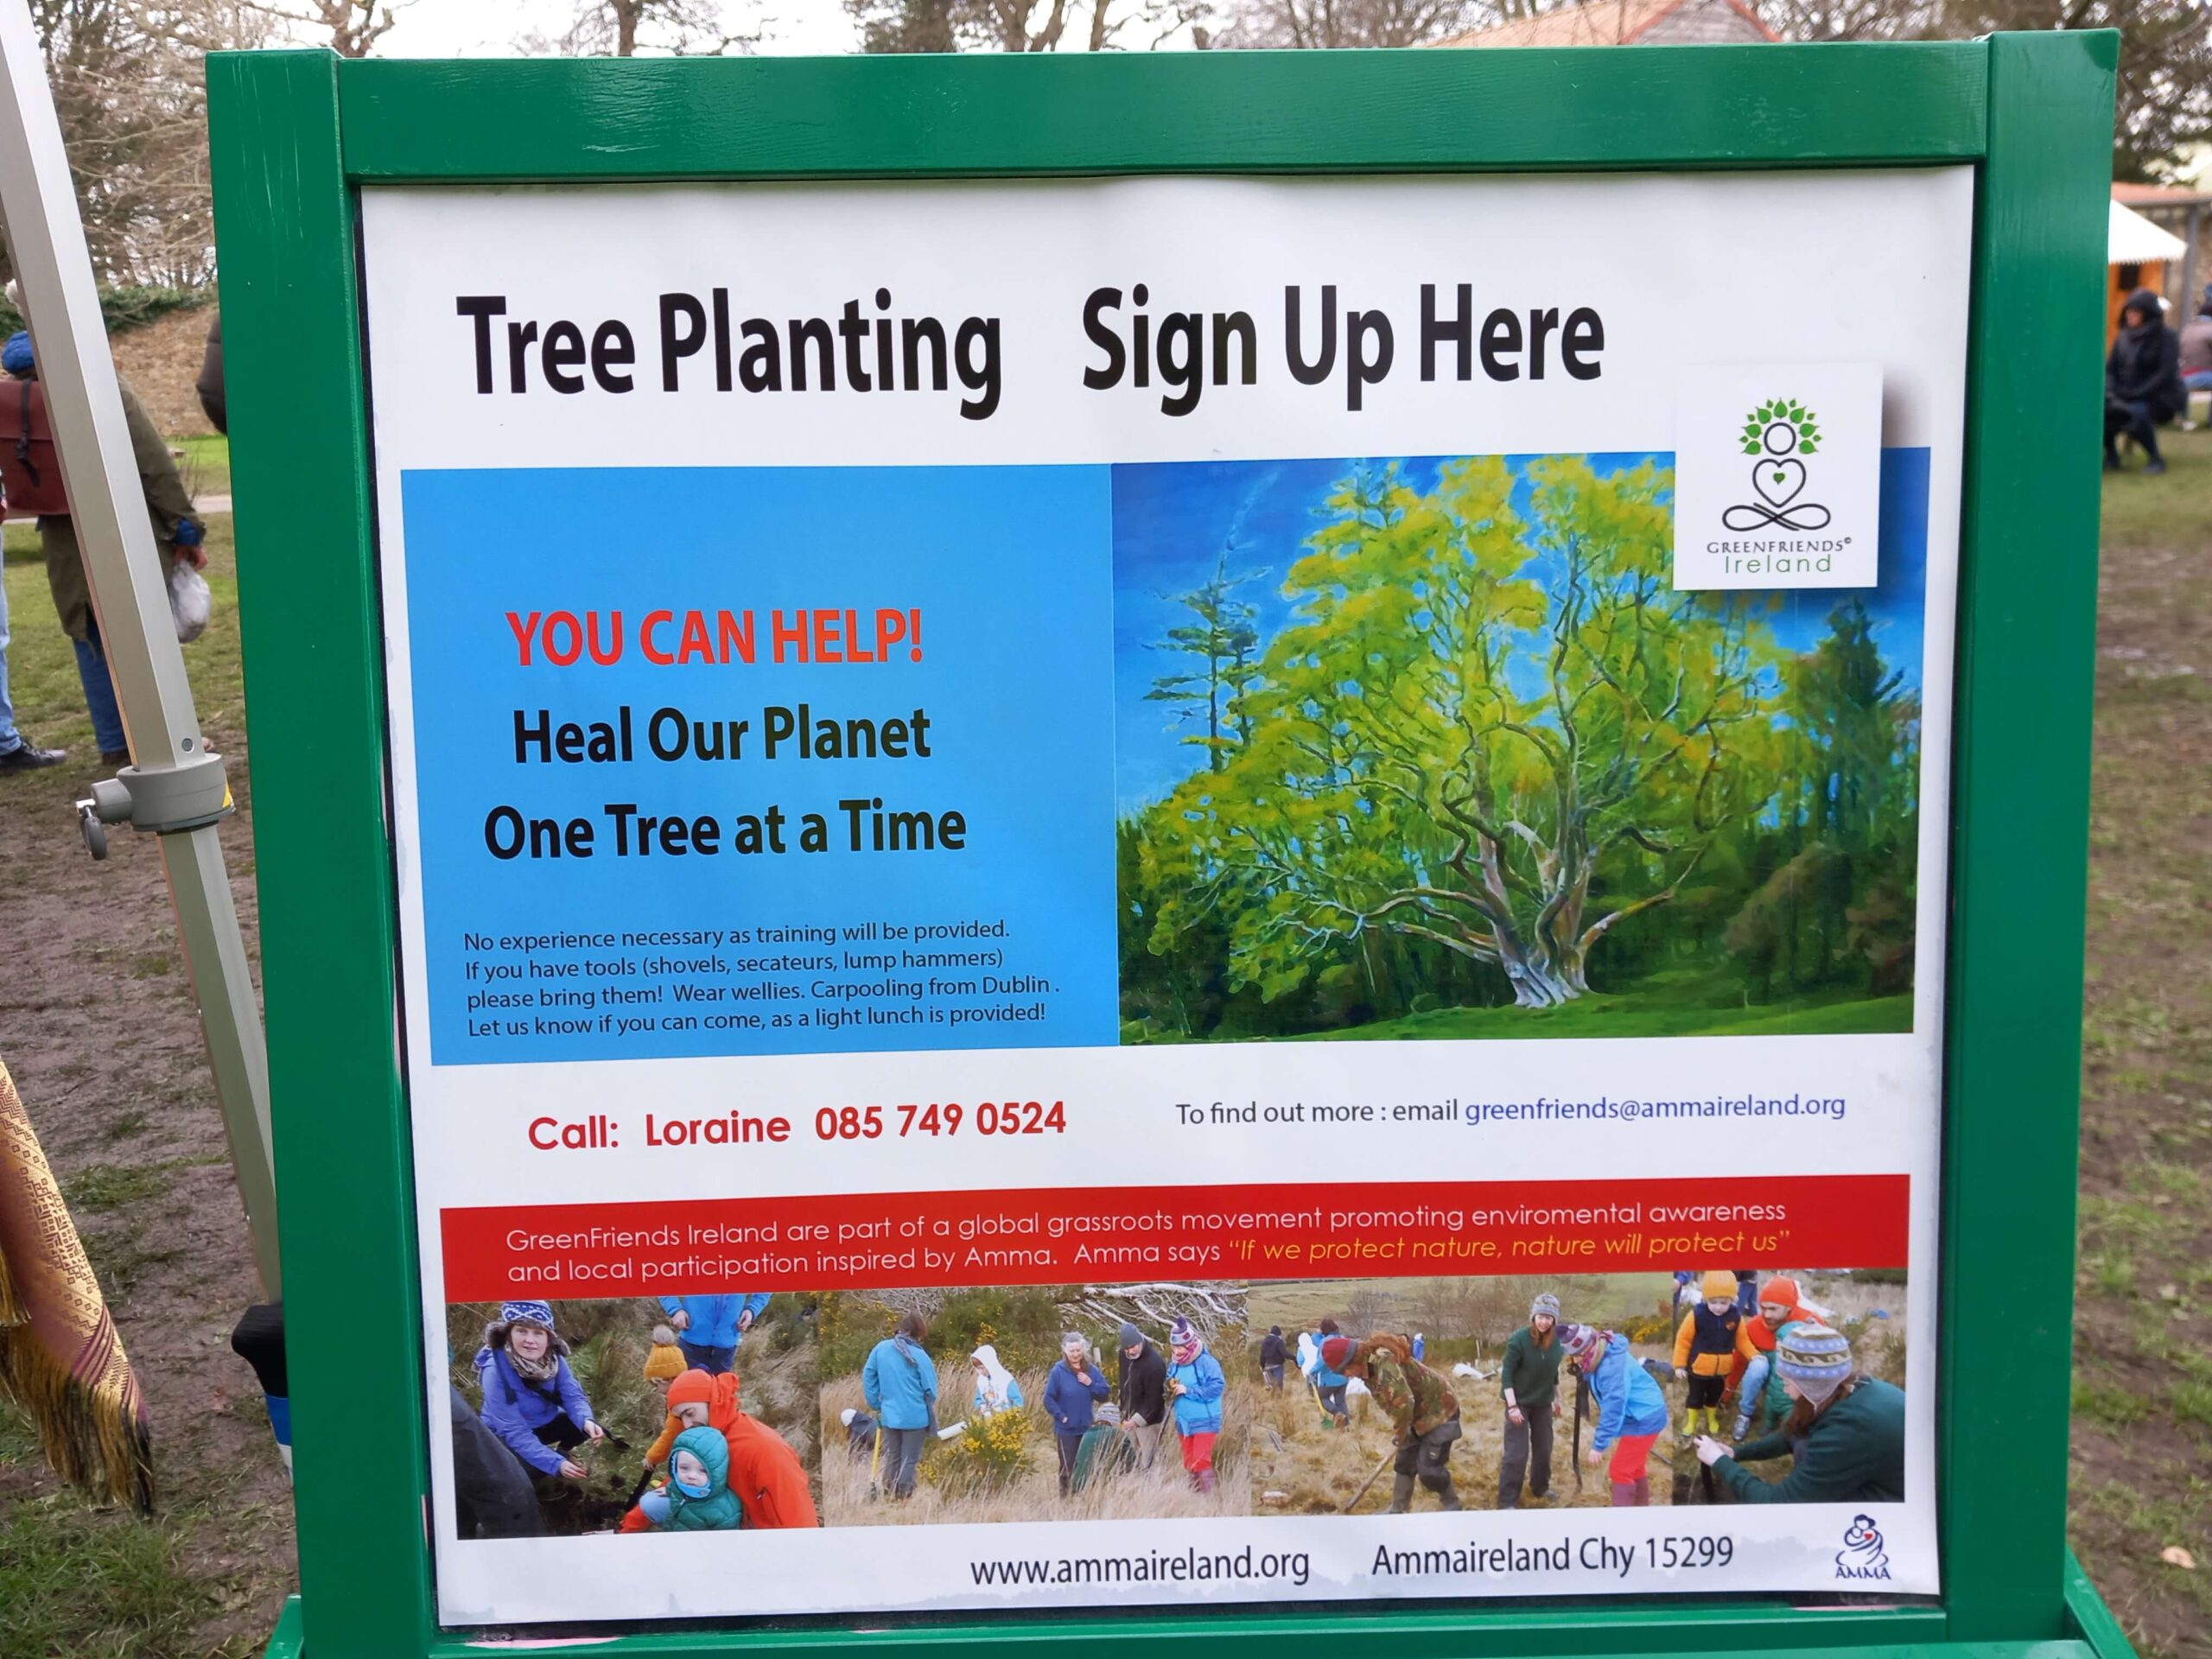 Tree planting sign with details of how to heal the planet